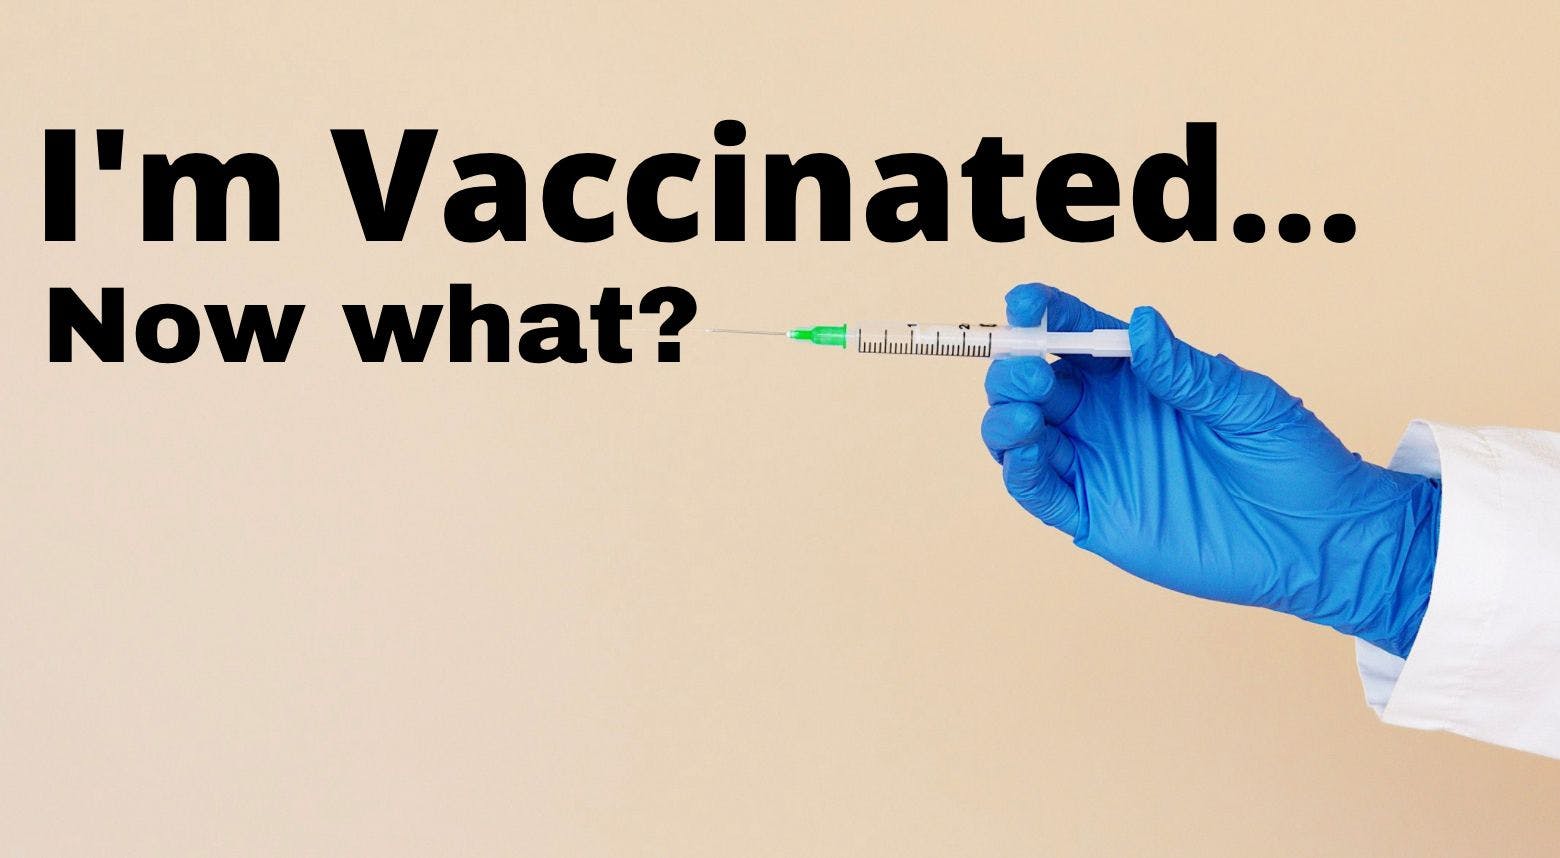 I'm Vaccinated, Now What?